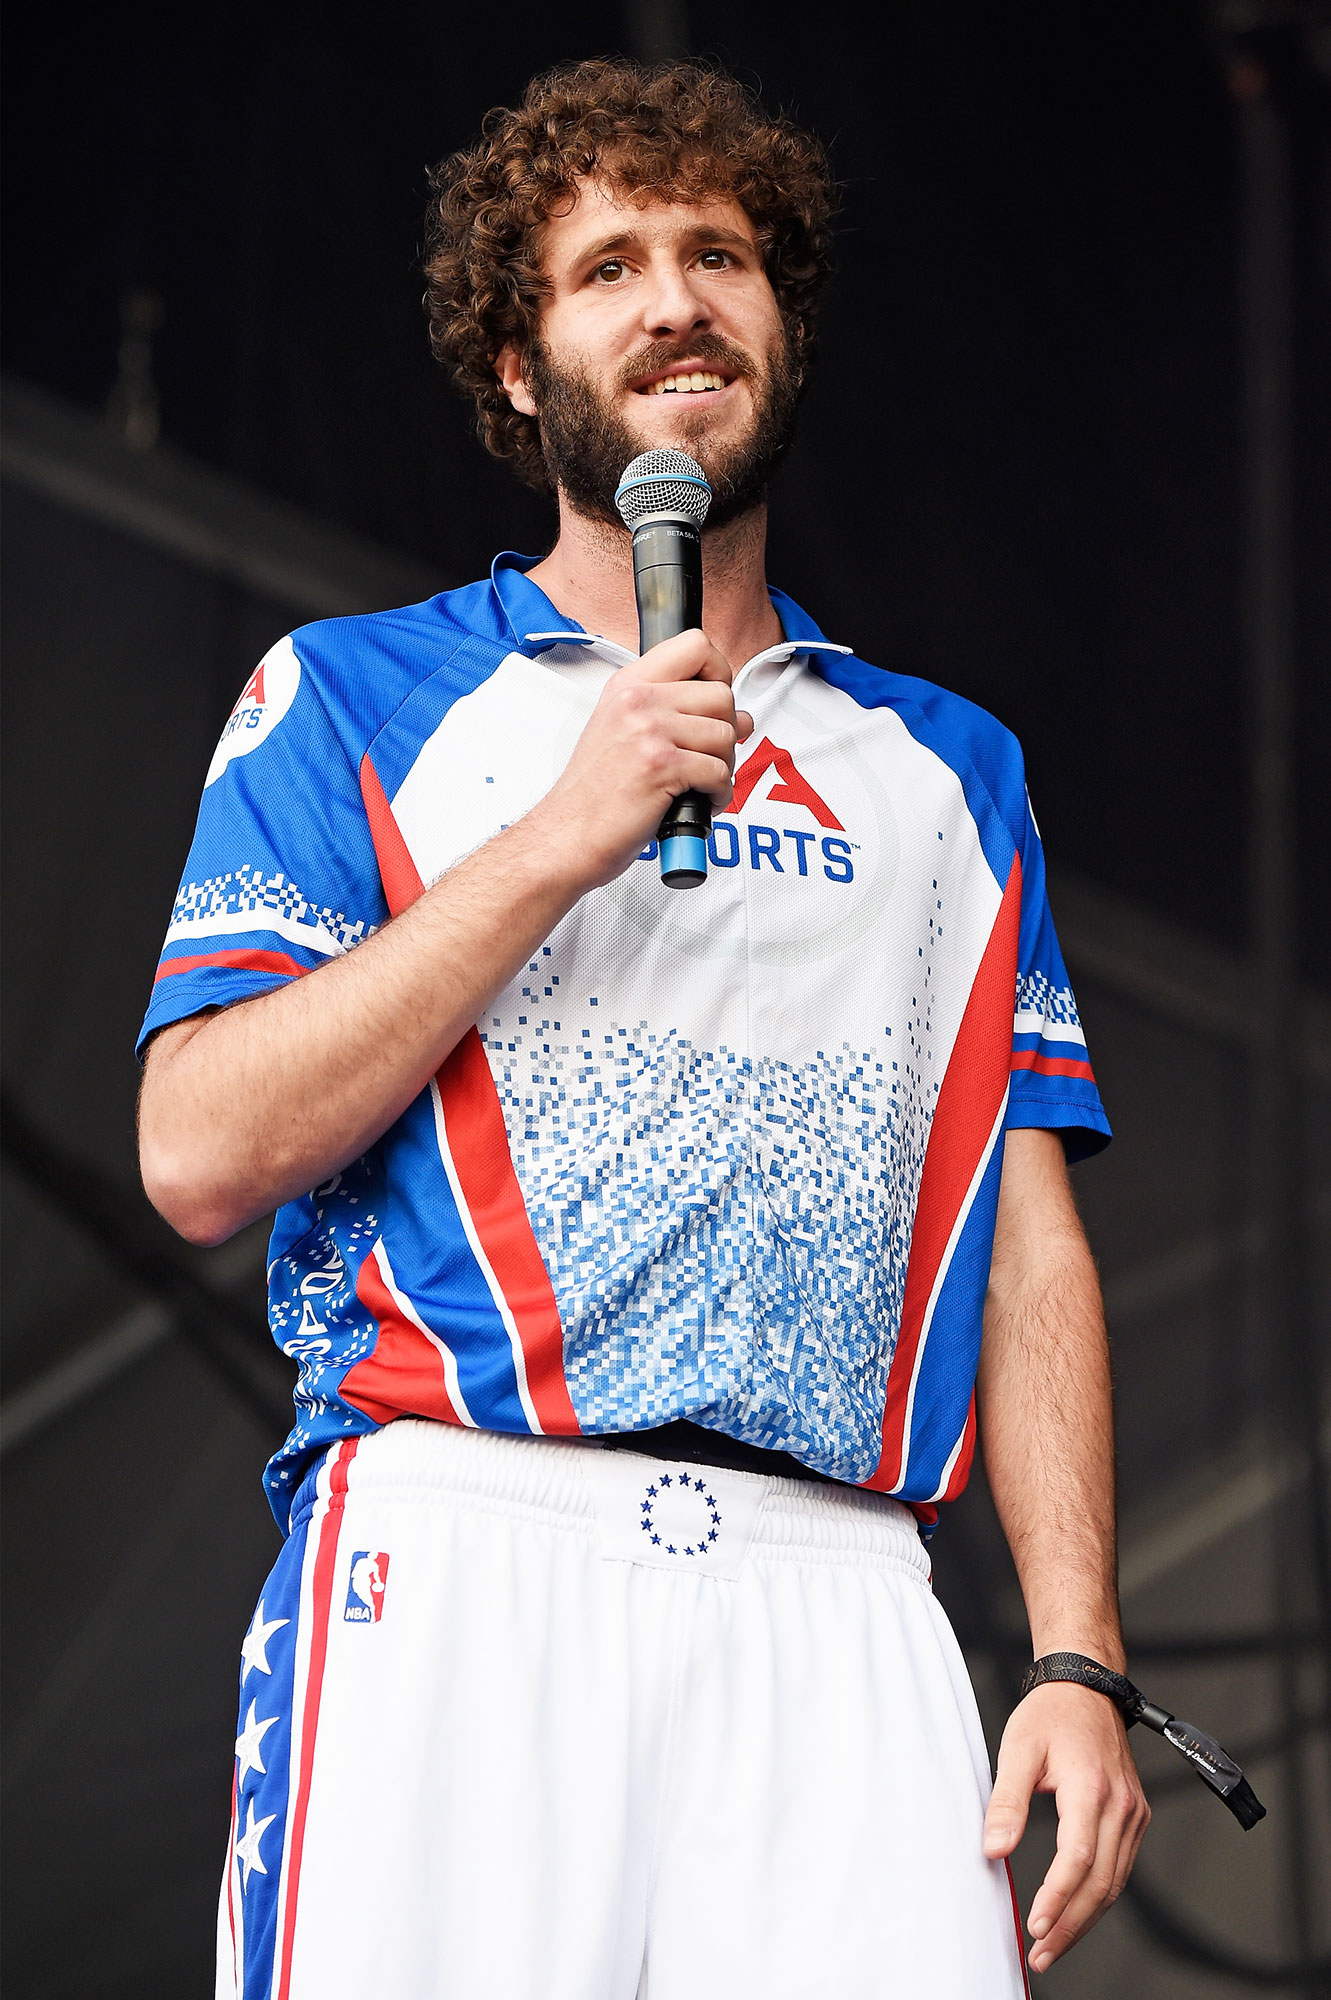 lil dicky professional rapper free download